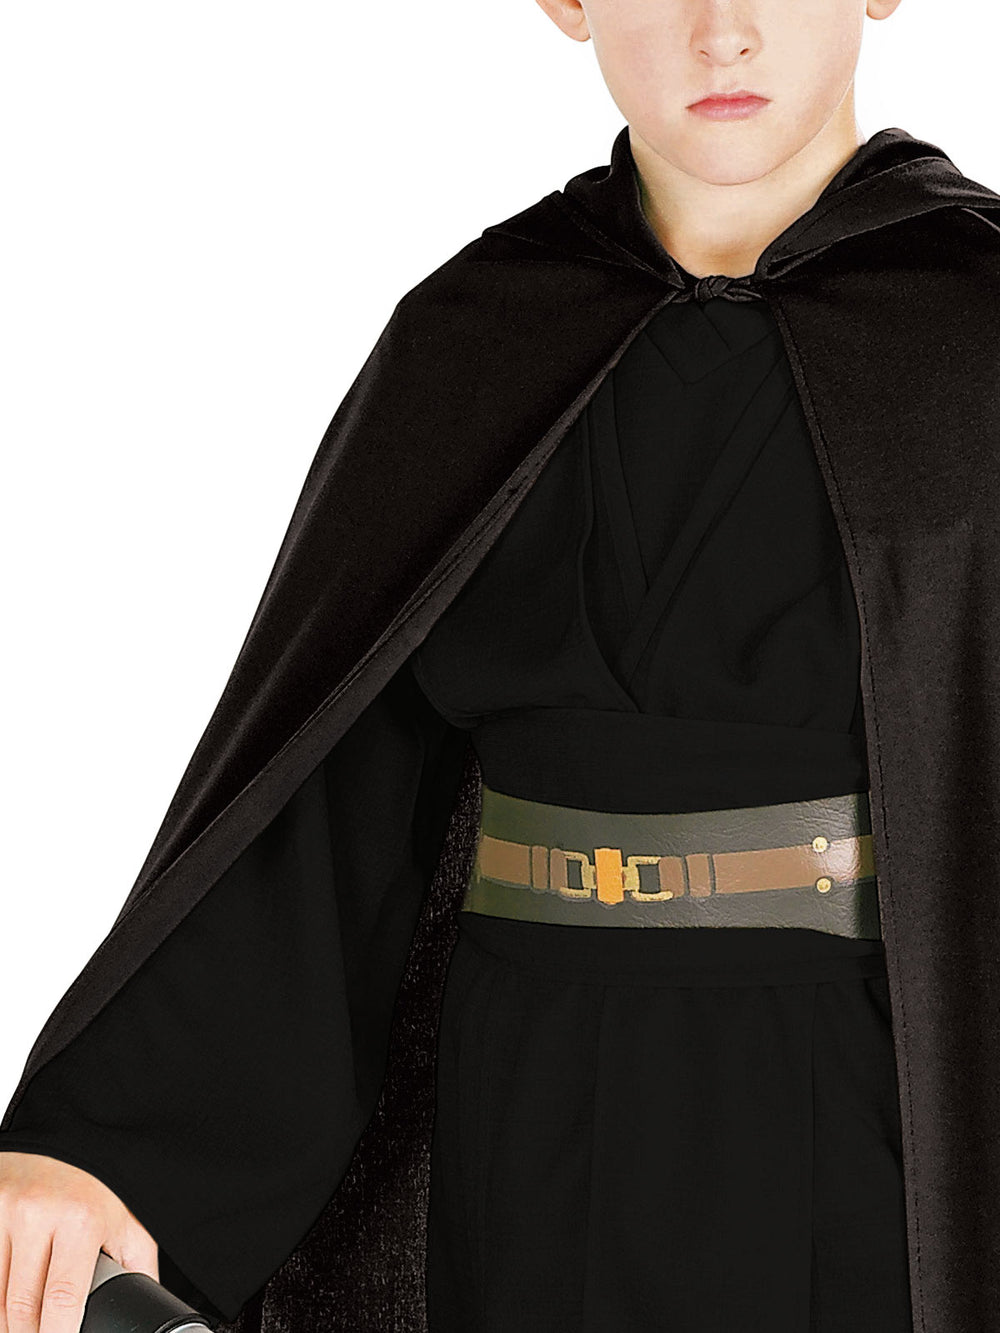 SITH HOODED ROBE, CHILD - Little Shop of Horrors